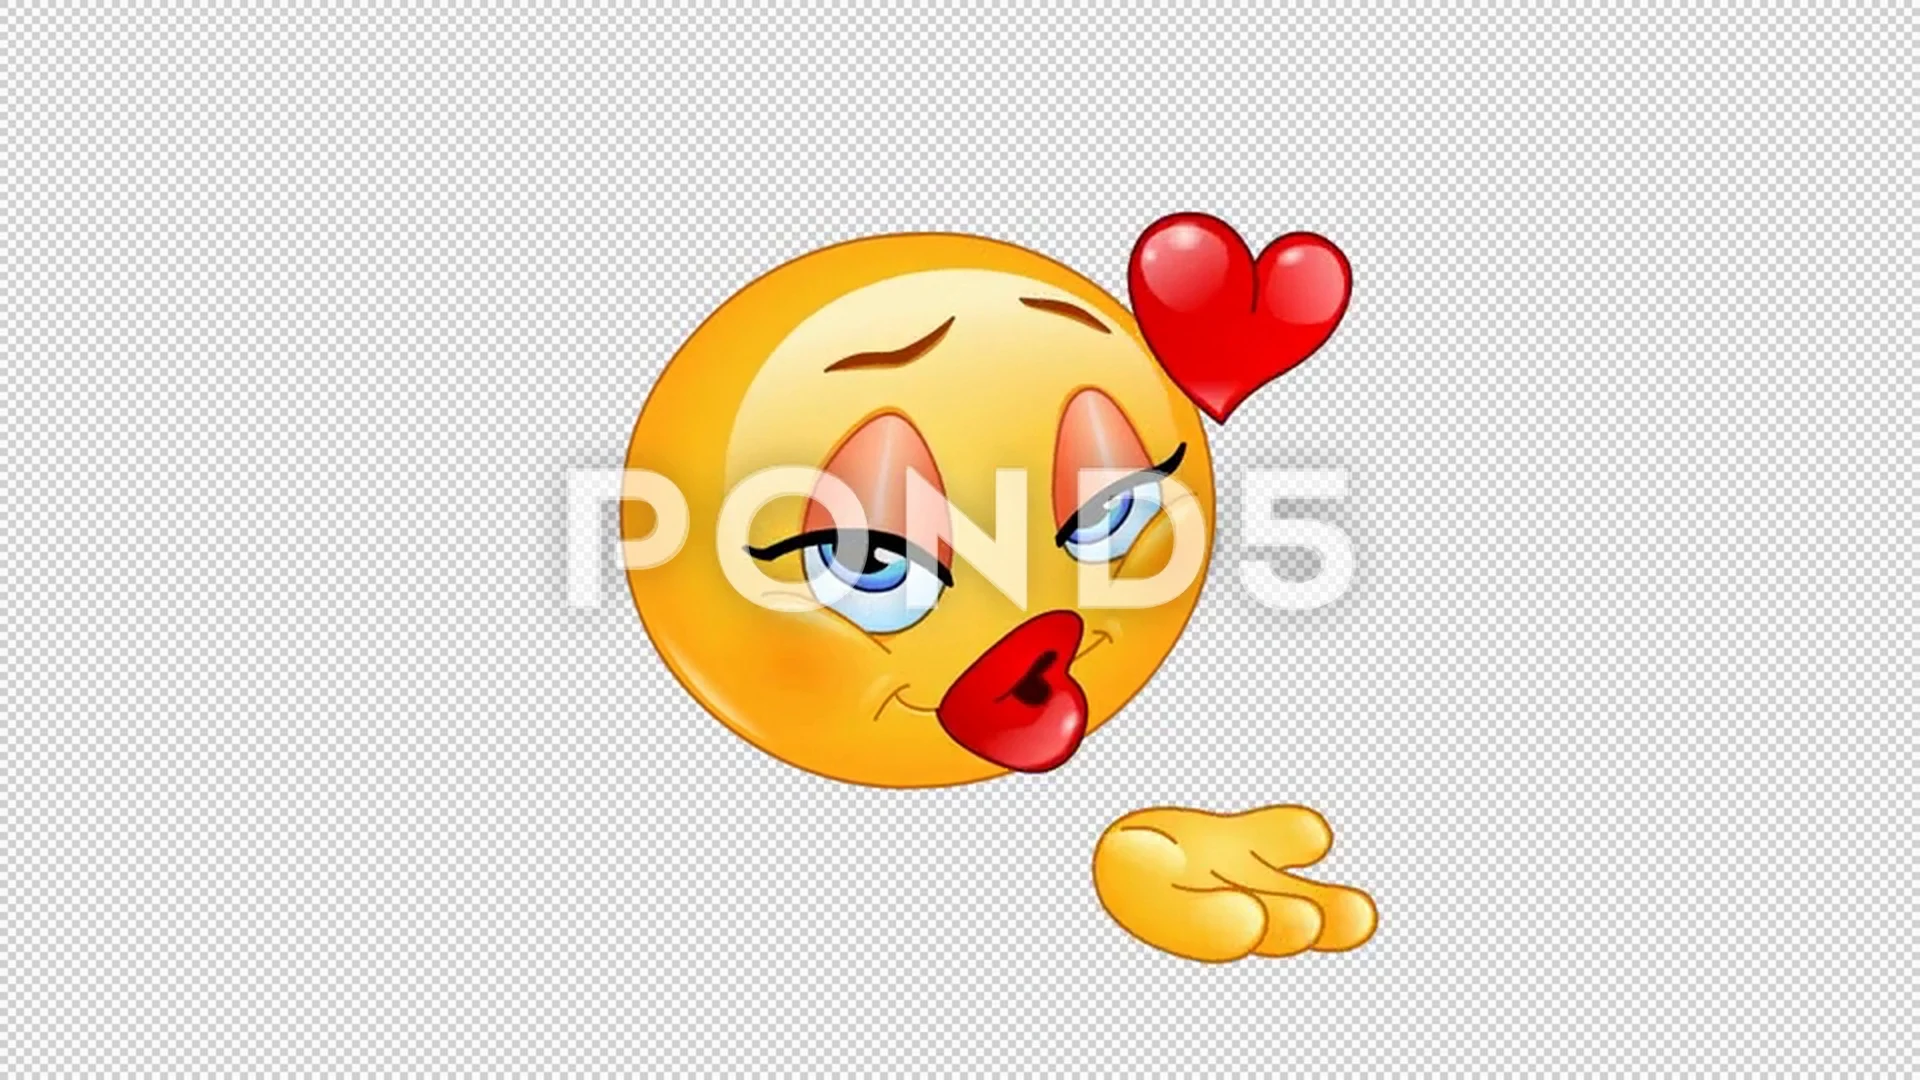 blowing kiss female emoticon animation | Stock Video | Pond5